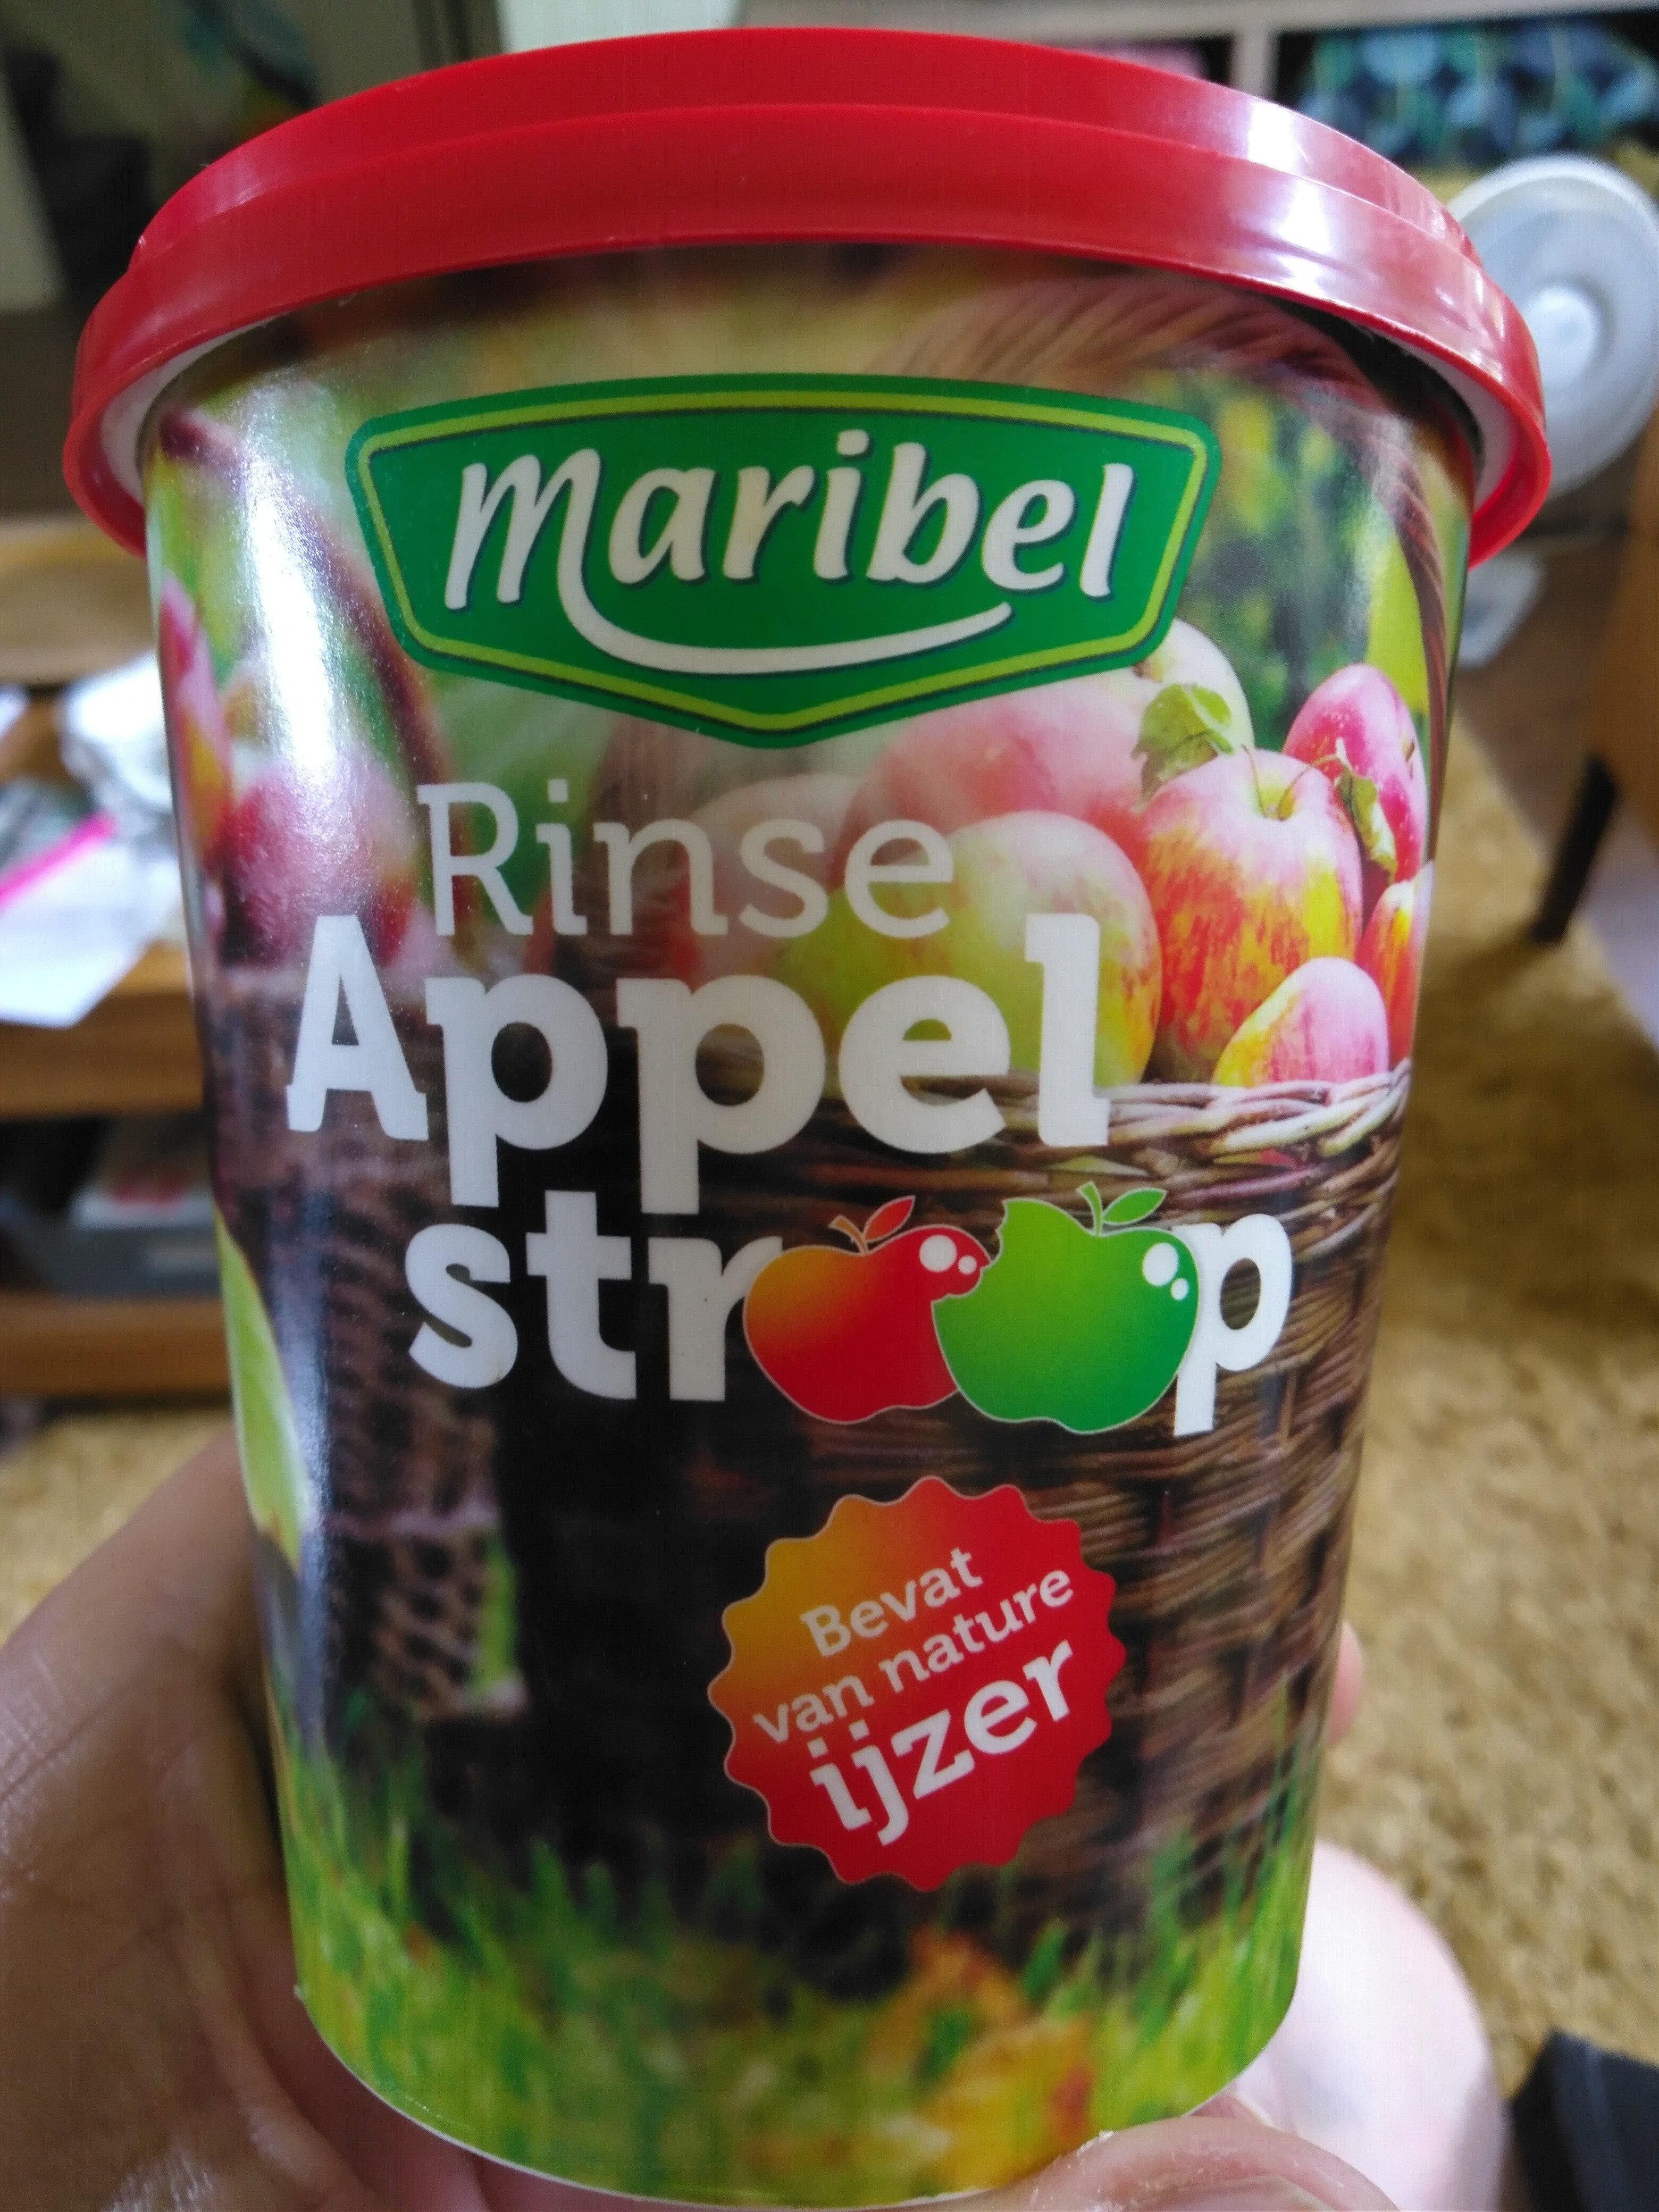 Rinse appelstroop - Product